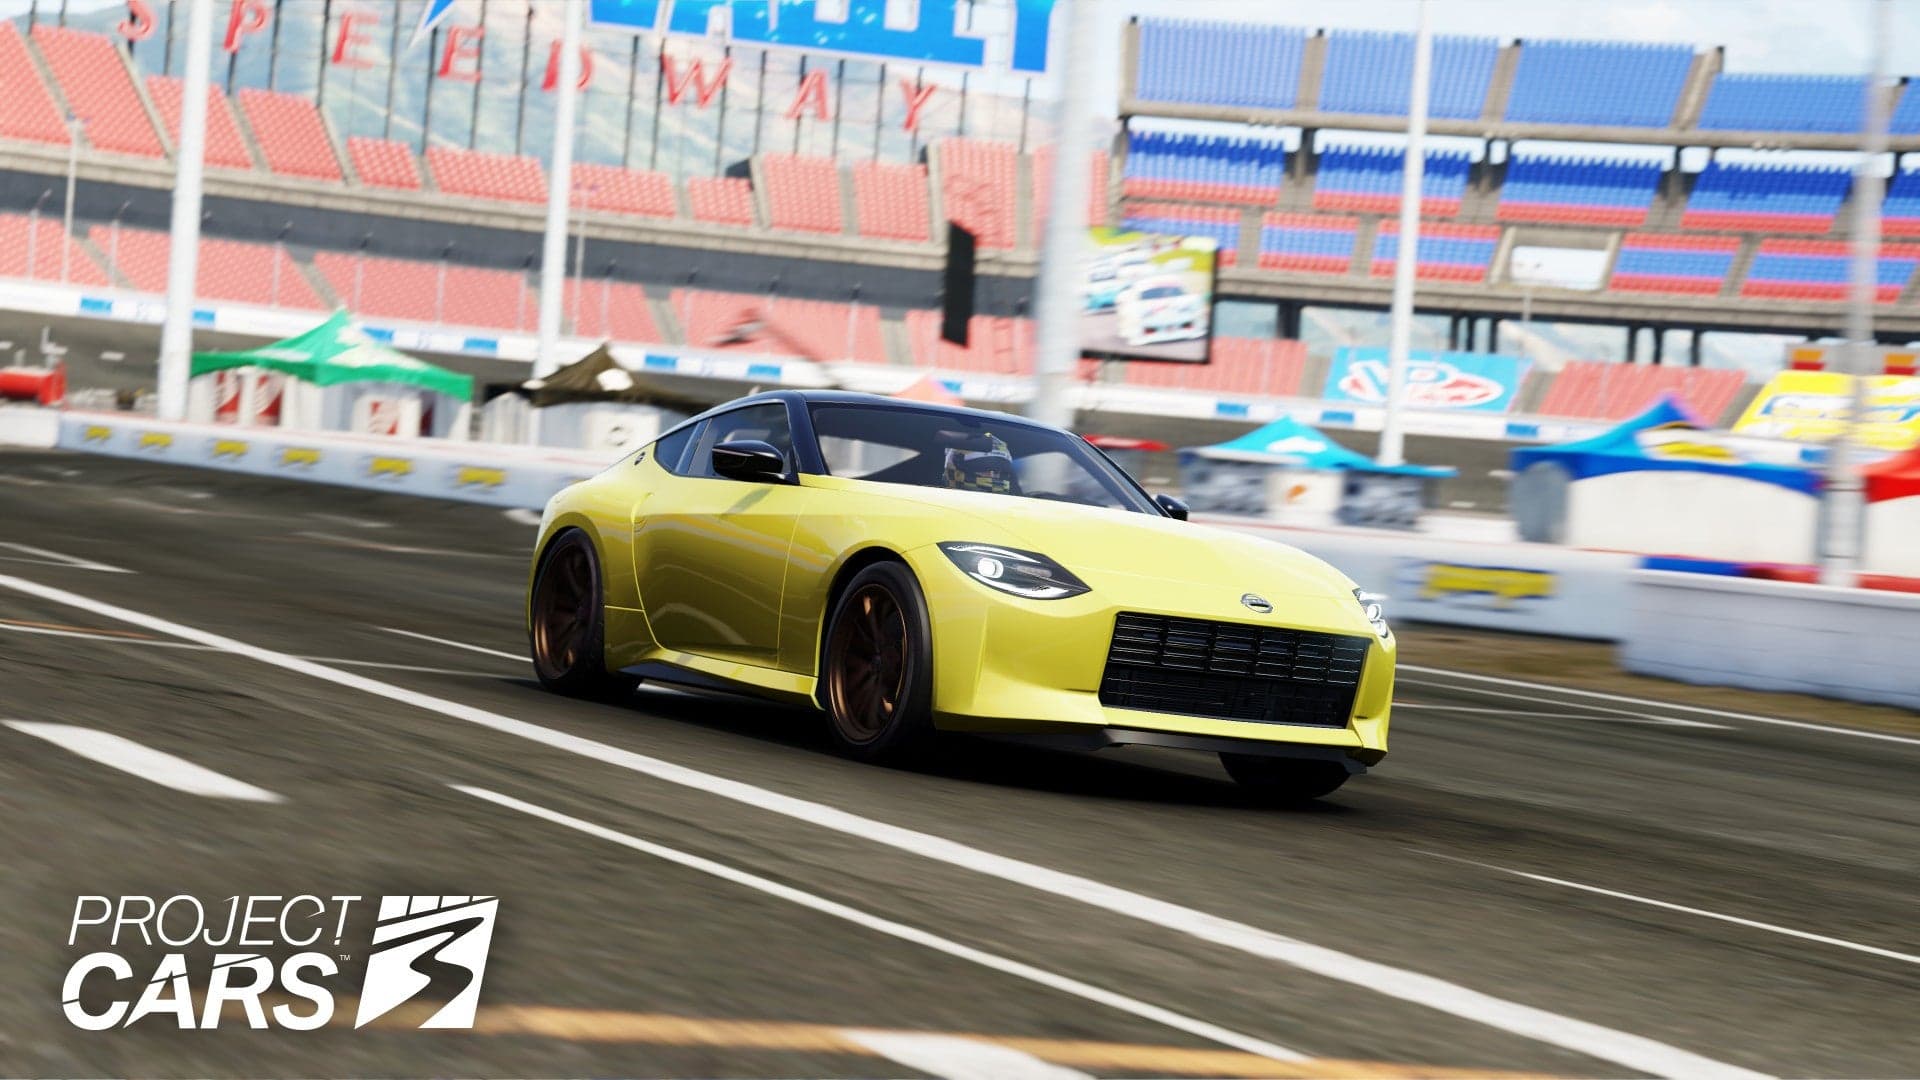 New Nissan Z Appears in Project Cars 3 With 444 Horsepower